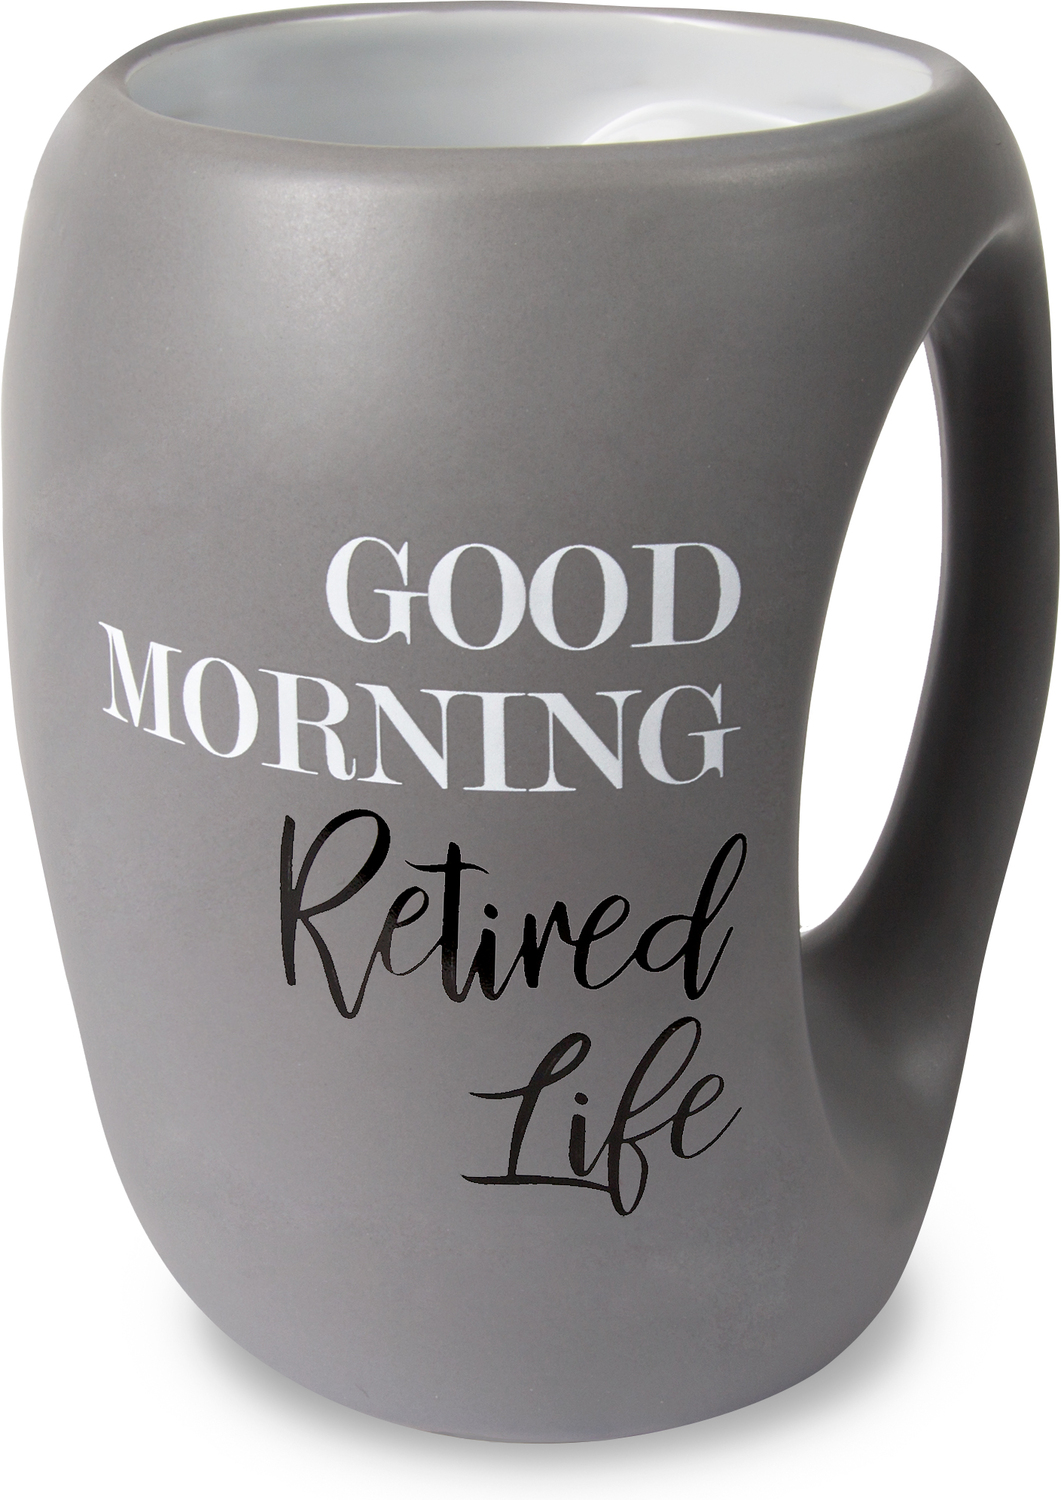 Retired Life by Good Morning - Retired Life - 16 oz Cup